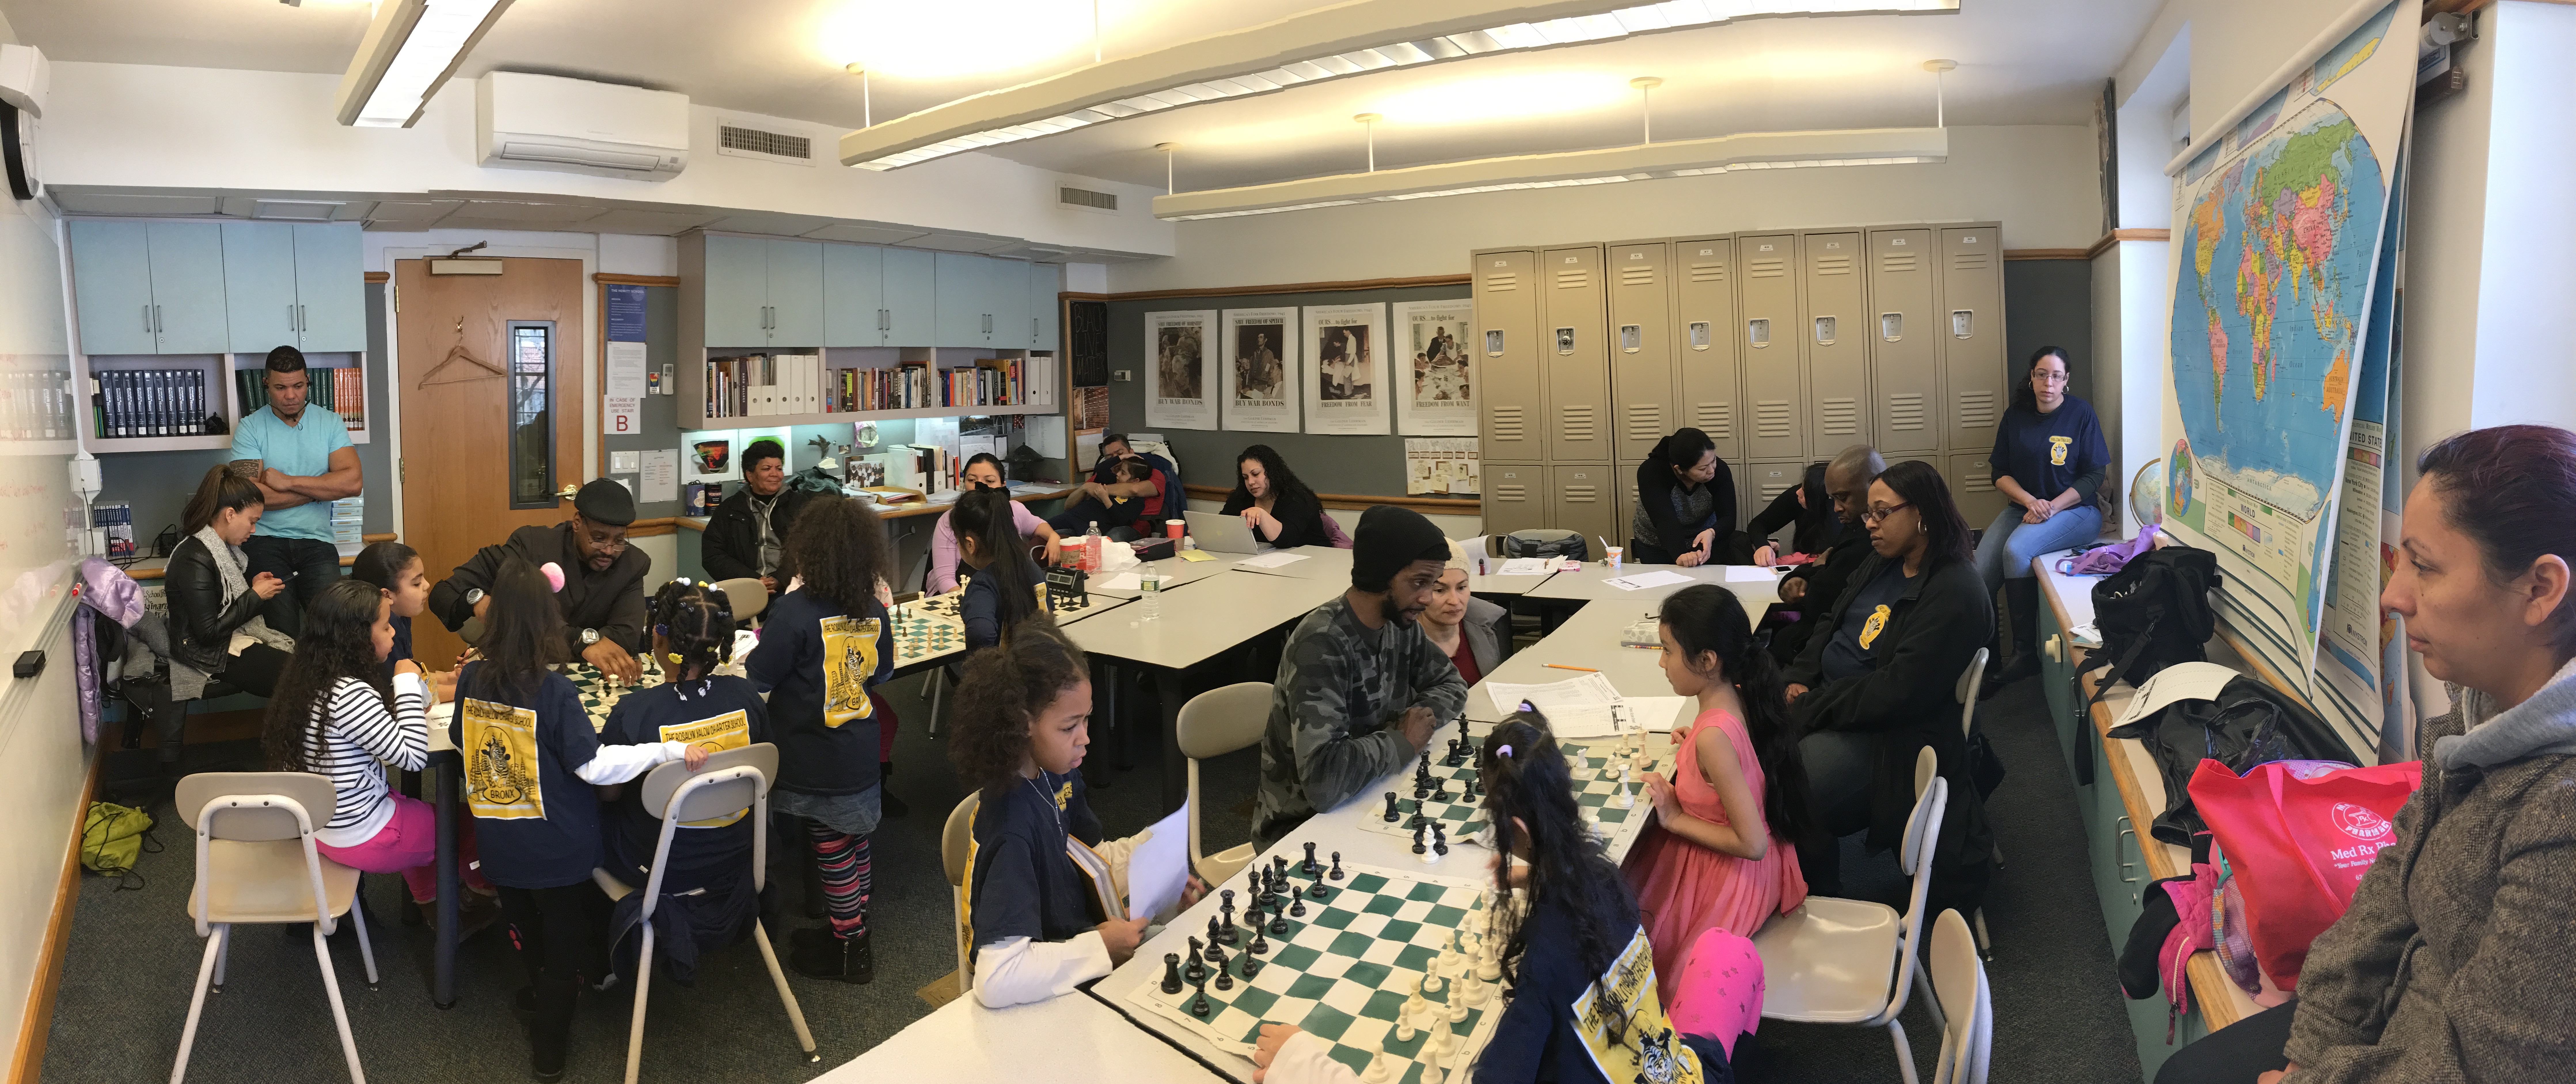 Students review games with coaches between 5 rounds